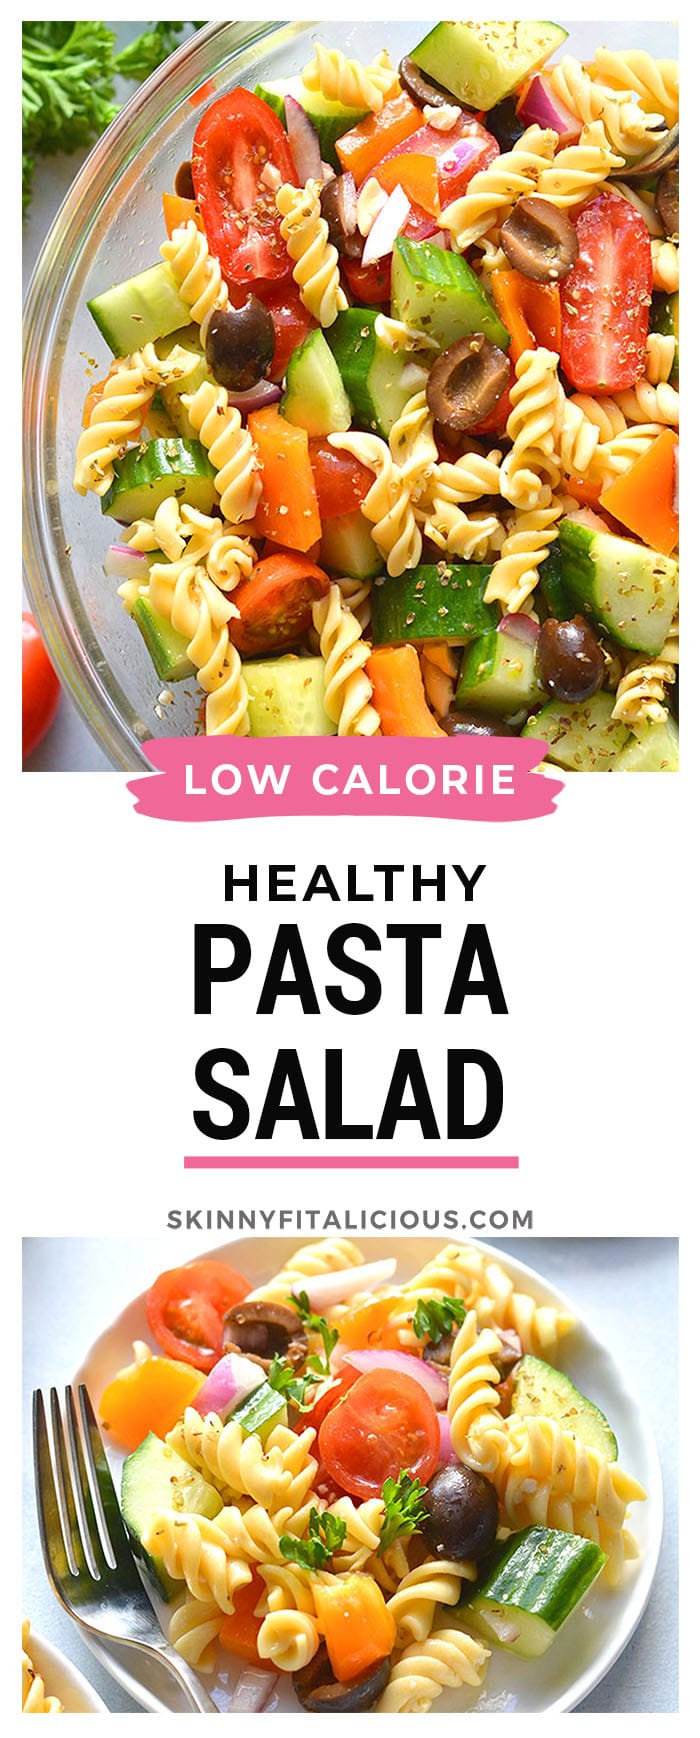 Low Calorie Pasta Salad is loaded with vegetables and chickpea pasta. Made light with healthy ingredients this tasty, gluten free and dairy free pasta salad recipe is one you will make time and again. 